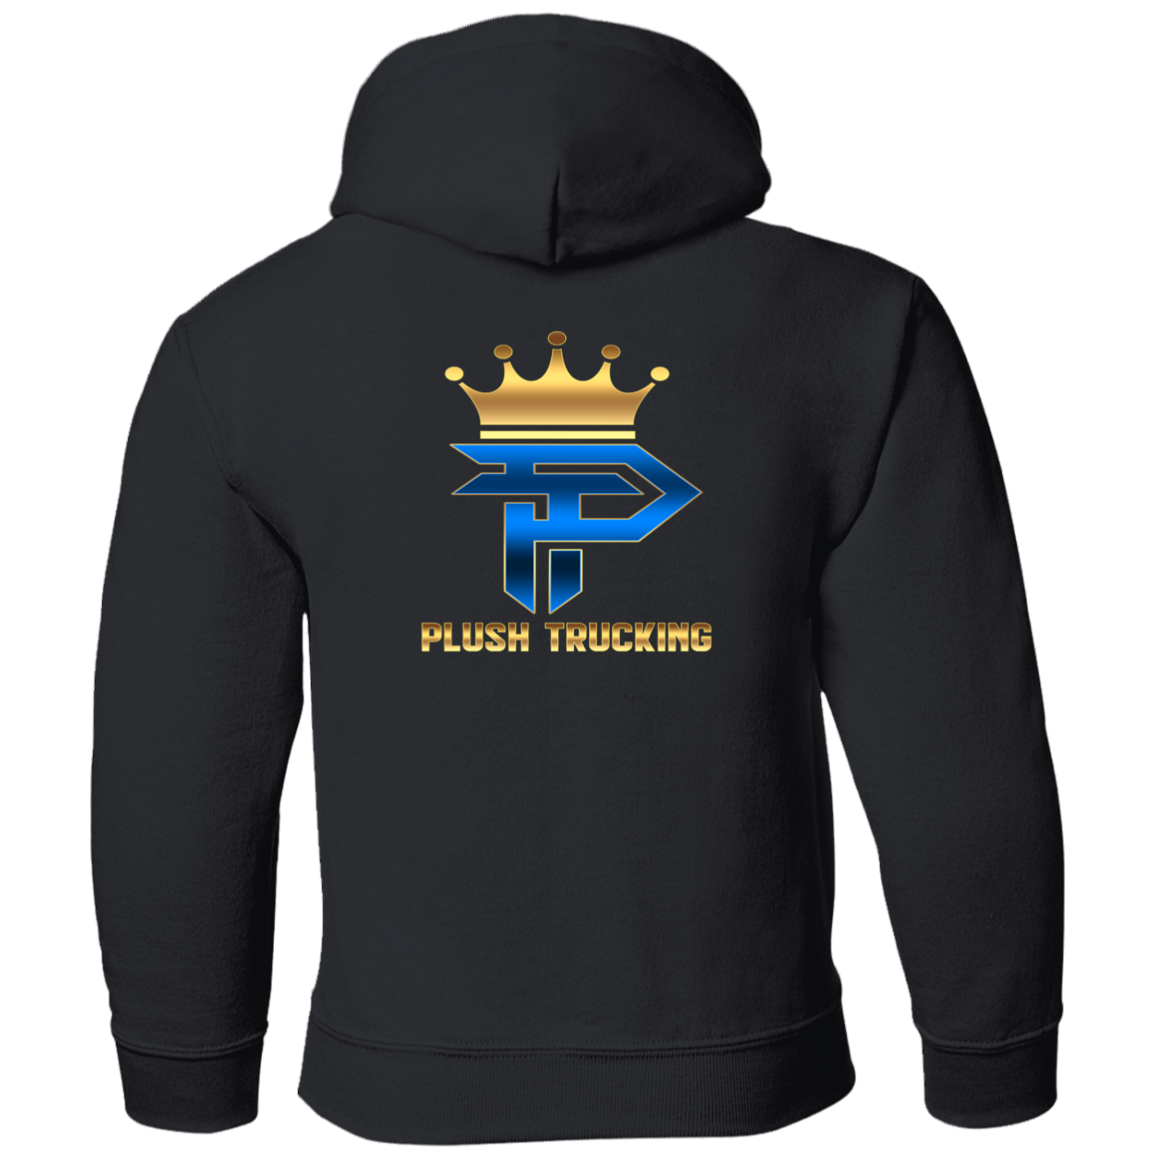 Trucking Hoodie for youth